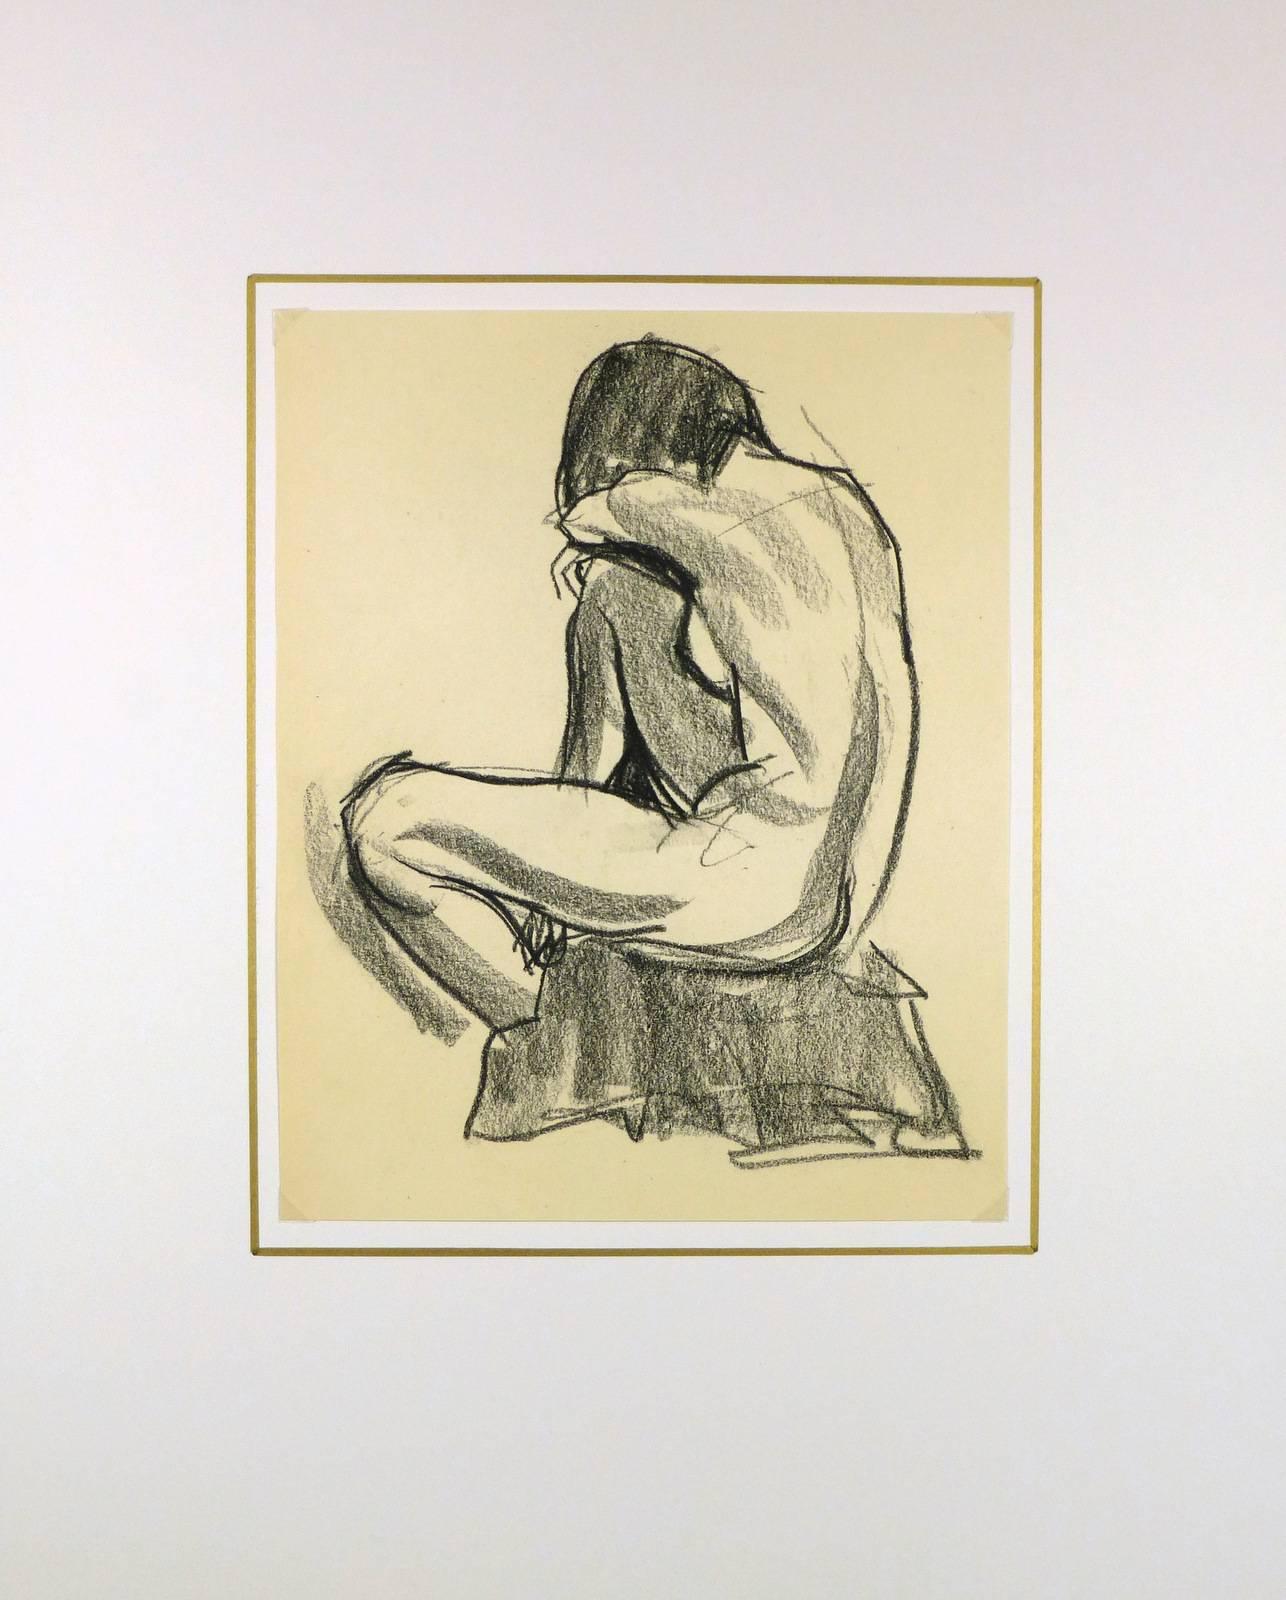 Classic charcoal nude drawing by French artist A. Bourgeau, circa 1930. 

Original artwork on paper displayed on a white mat with a gold border. Mat fits a standard-size frame.  Archival plastic sleeve and Certificate of Authenticity included.